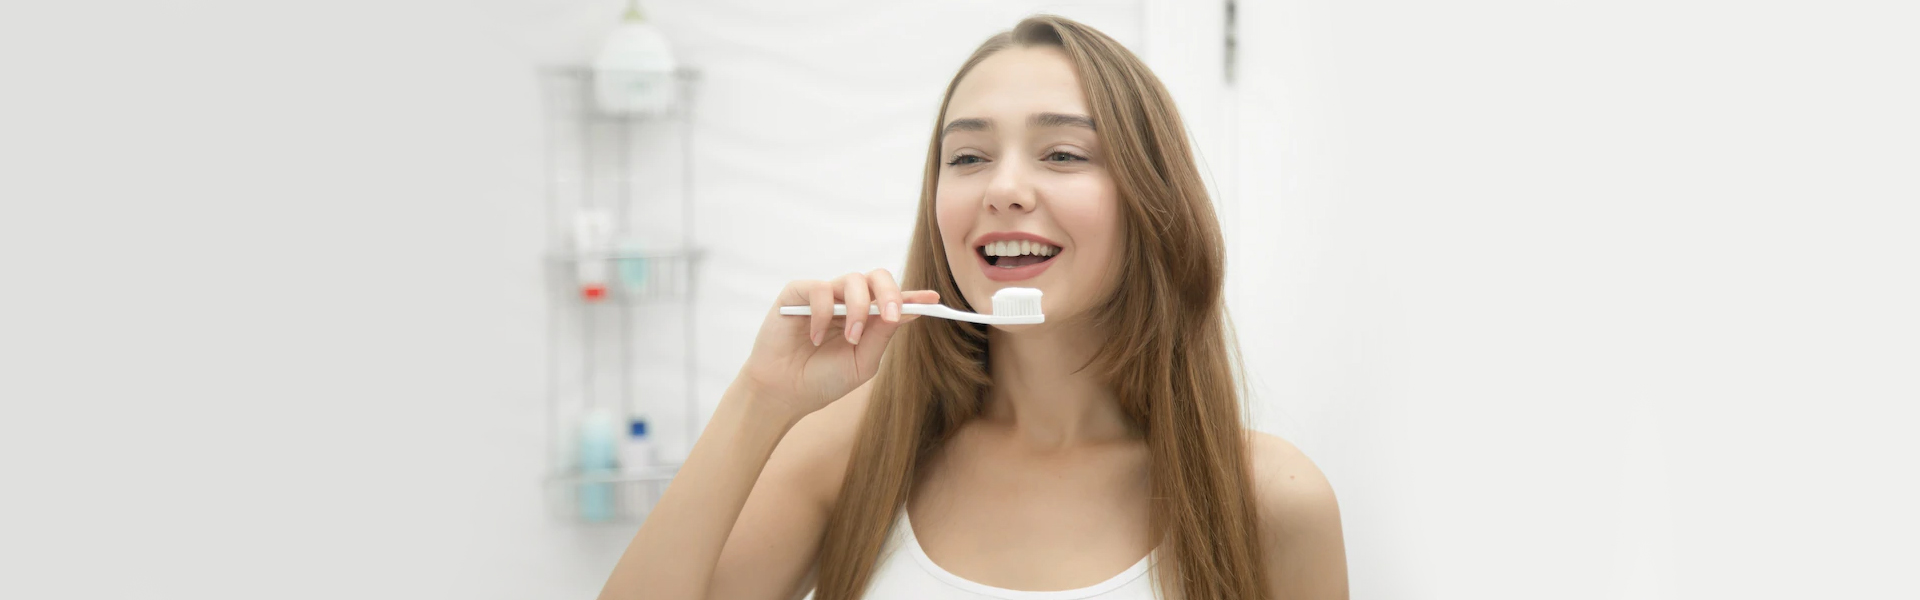 What Are the Benefits of Using Interdental Brushes?